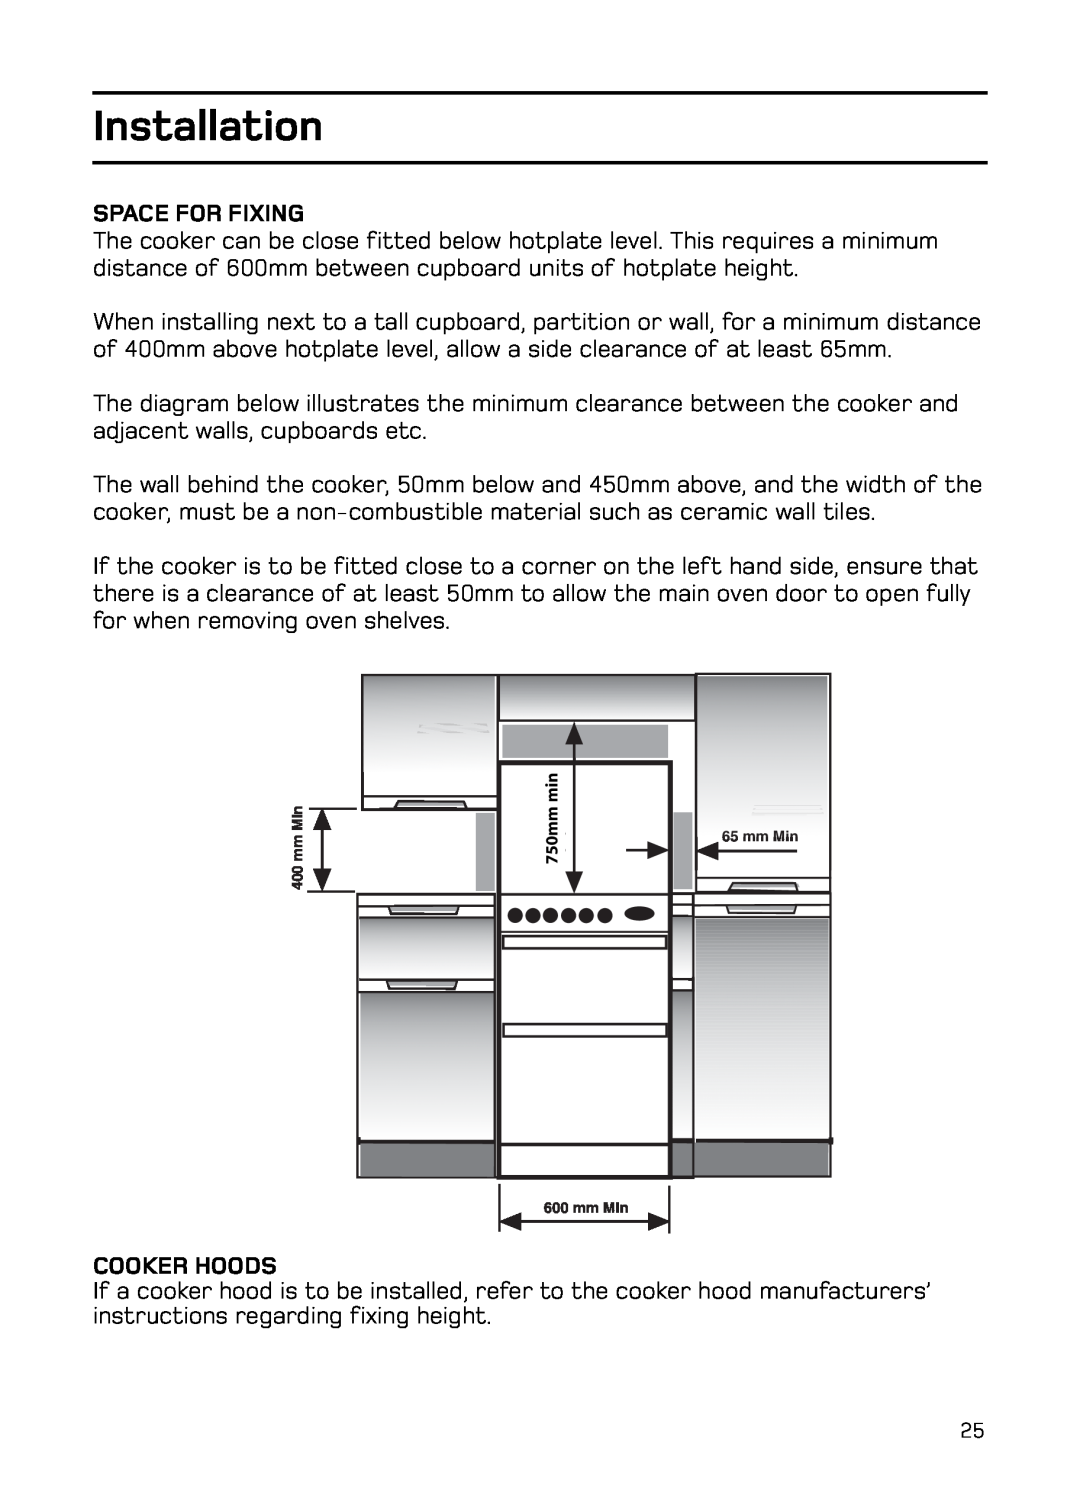 Hotpoint EG74 manual Space For Fixing, Cooker Hoods, Installation, 750mm 